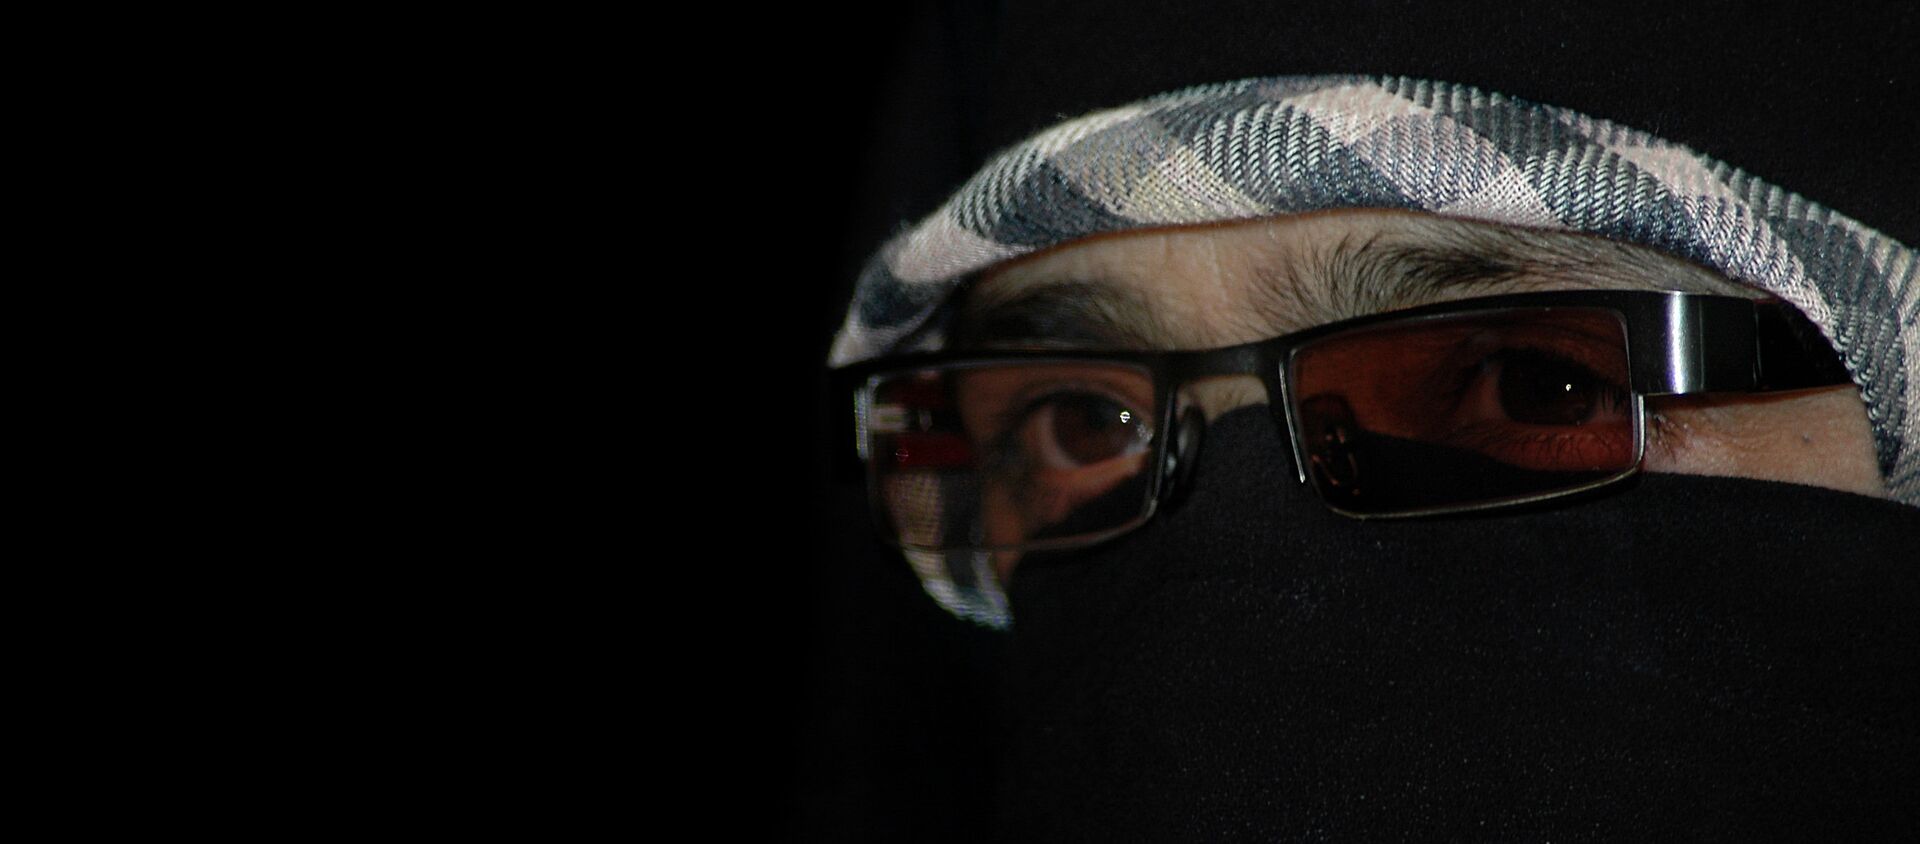 Asiya Andrabi, the head of Kashmir's women's separatist group, Dukhtaran-e- millat, or Daughters of the Nation, looks on during a press conference in Srinagar, India. (File) - Sputnik International, 1920, 23.02.2021